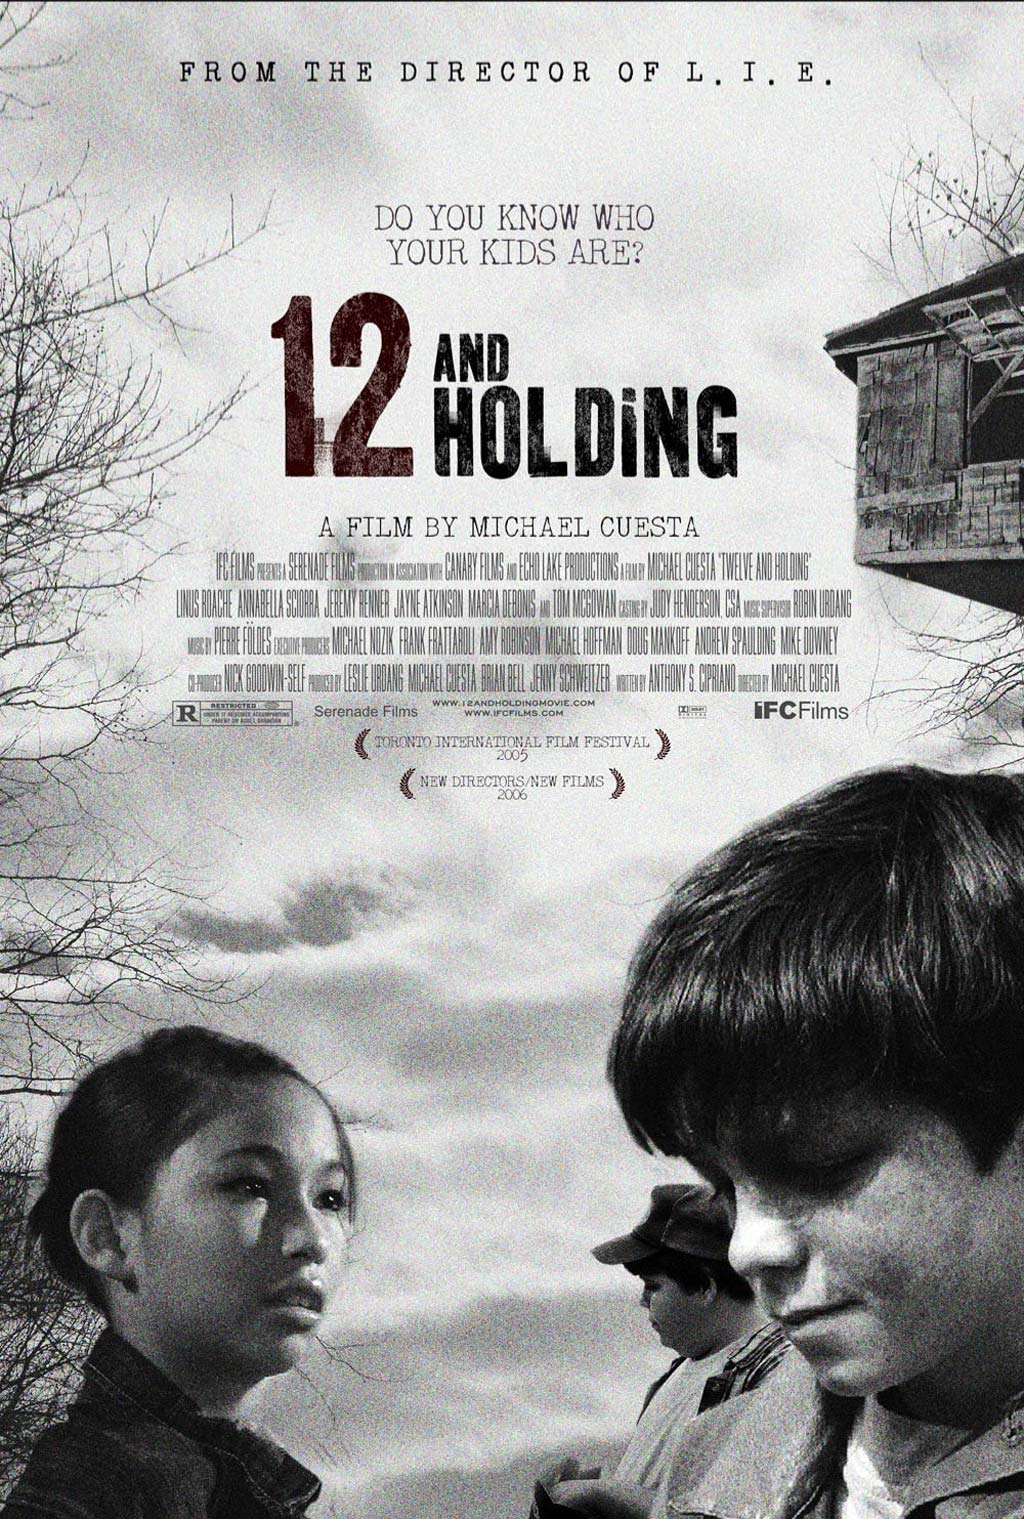 [H_12_and_holding_2.jpg]